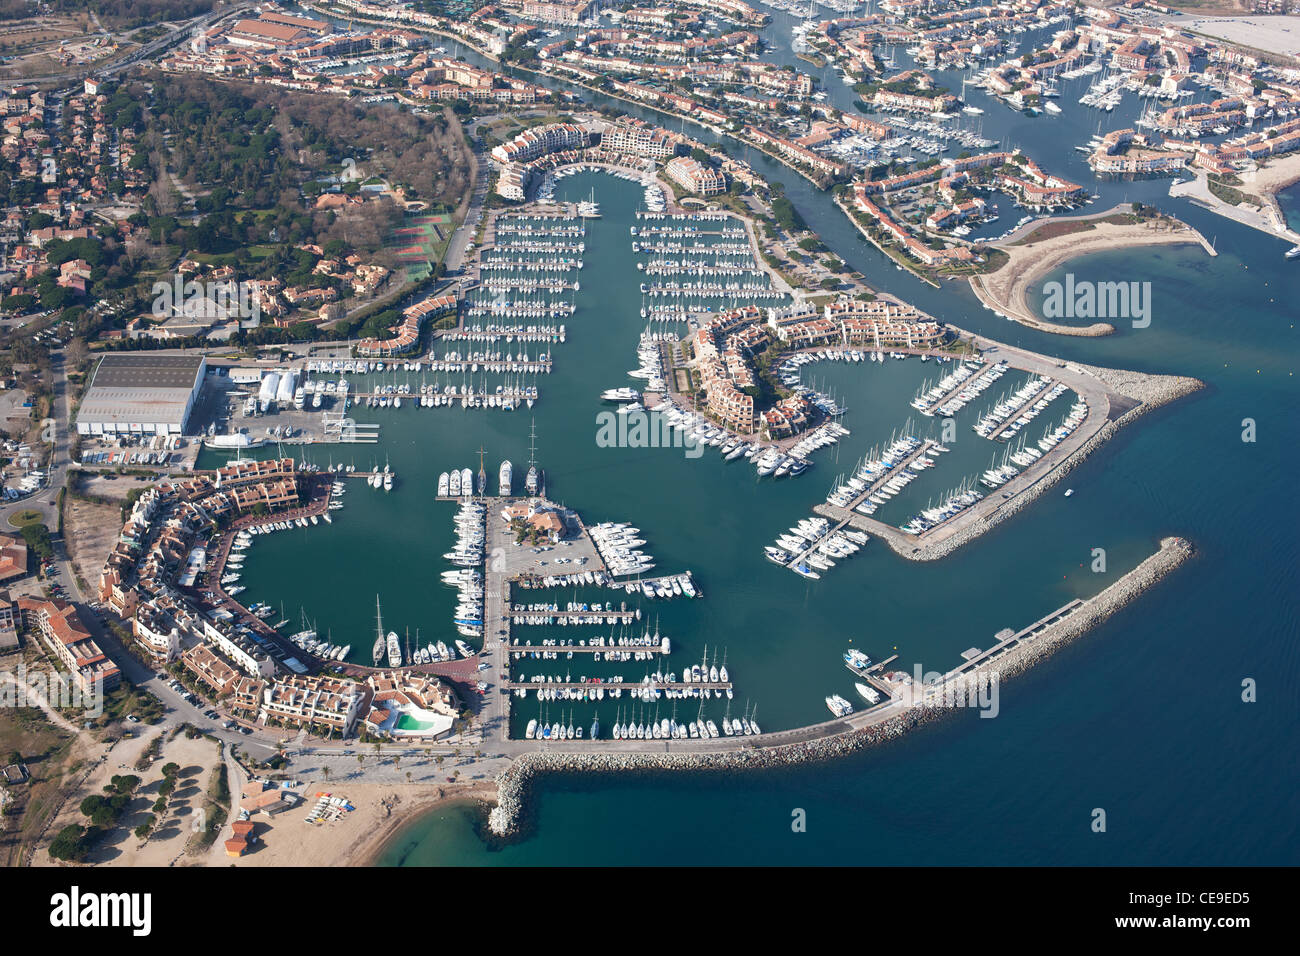 AERIAL VIEW. Les Marines de Cogolin and Port Grimaud in the upper right. Gulf of Saint-Tropez. Var, French Riviera, France. Stock Photo